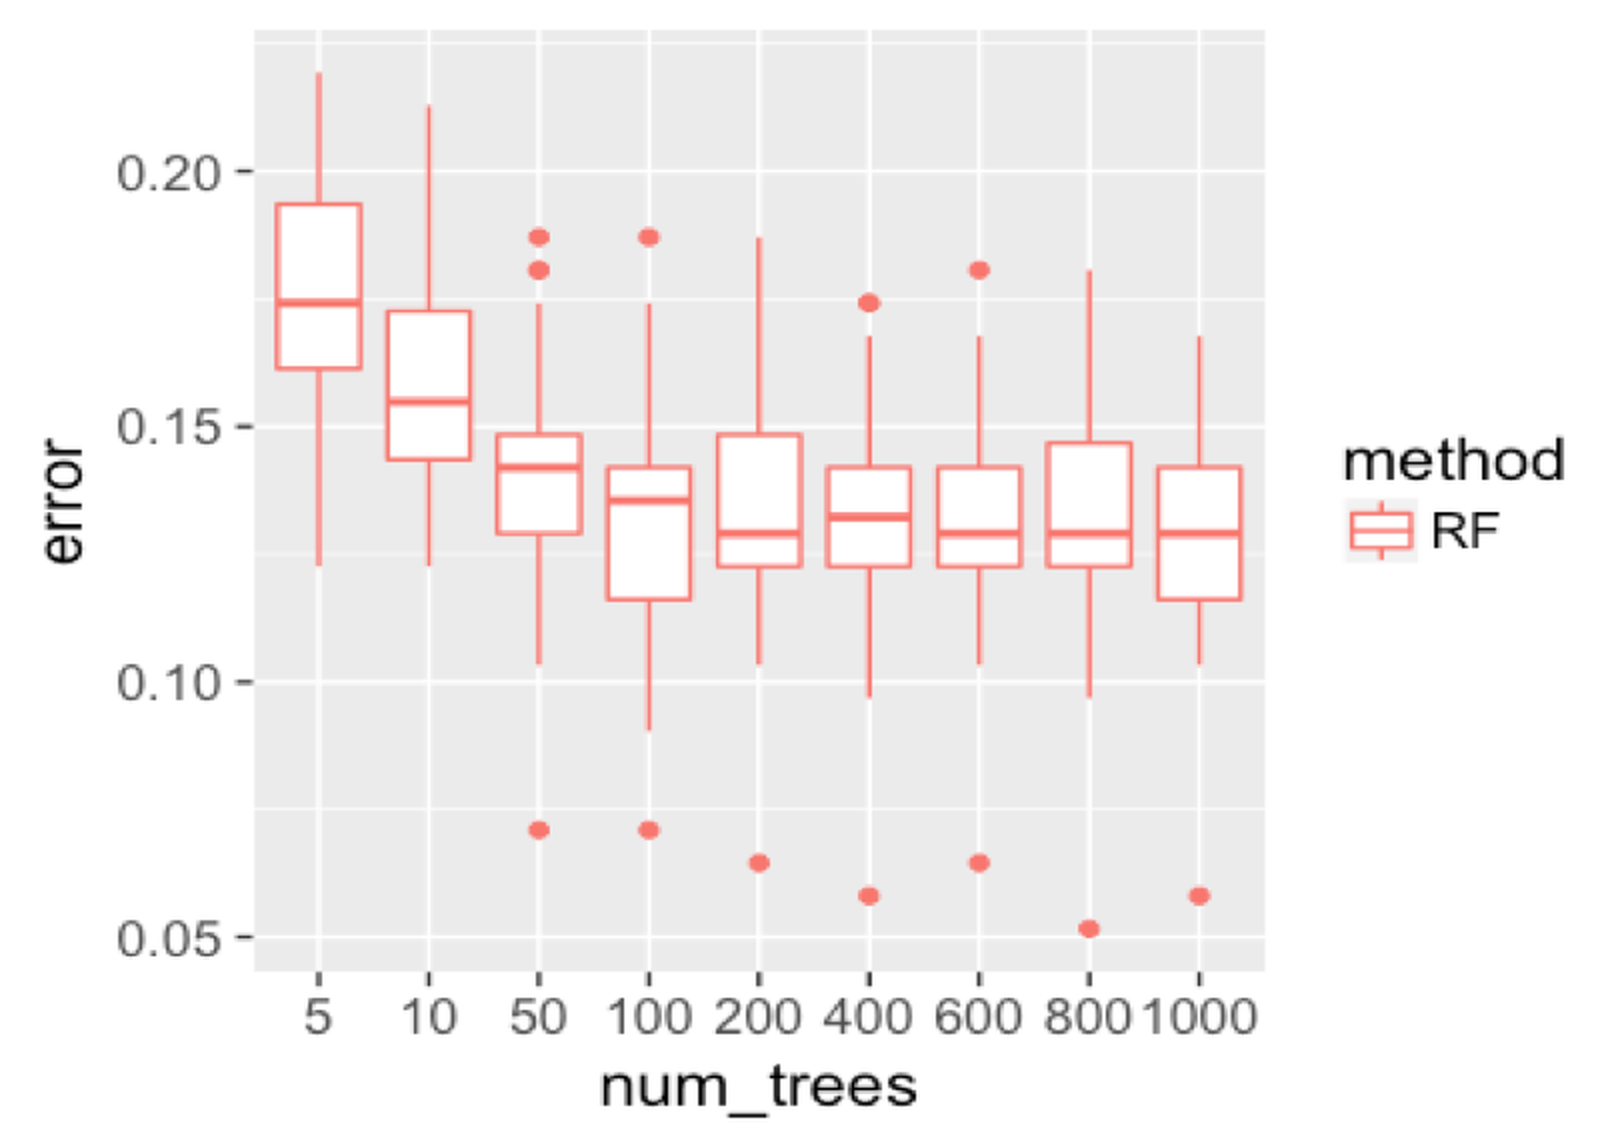  Boxplots of the classification error rates for random forests with a different number of trees